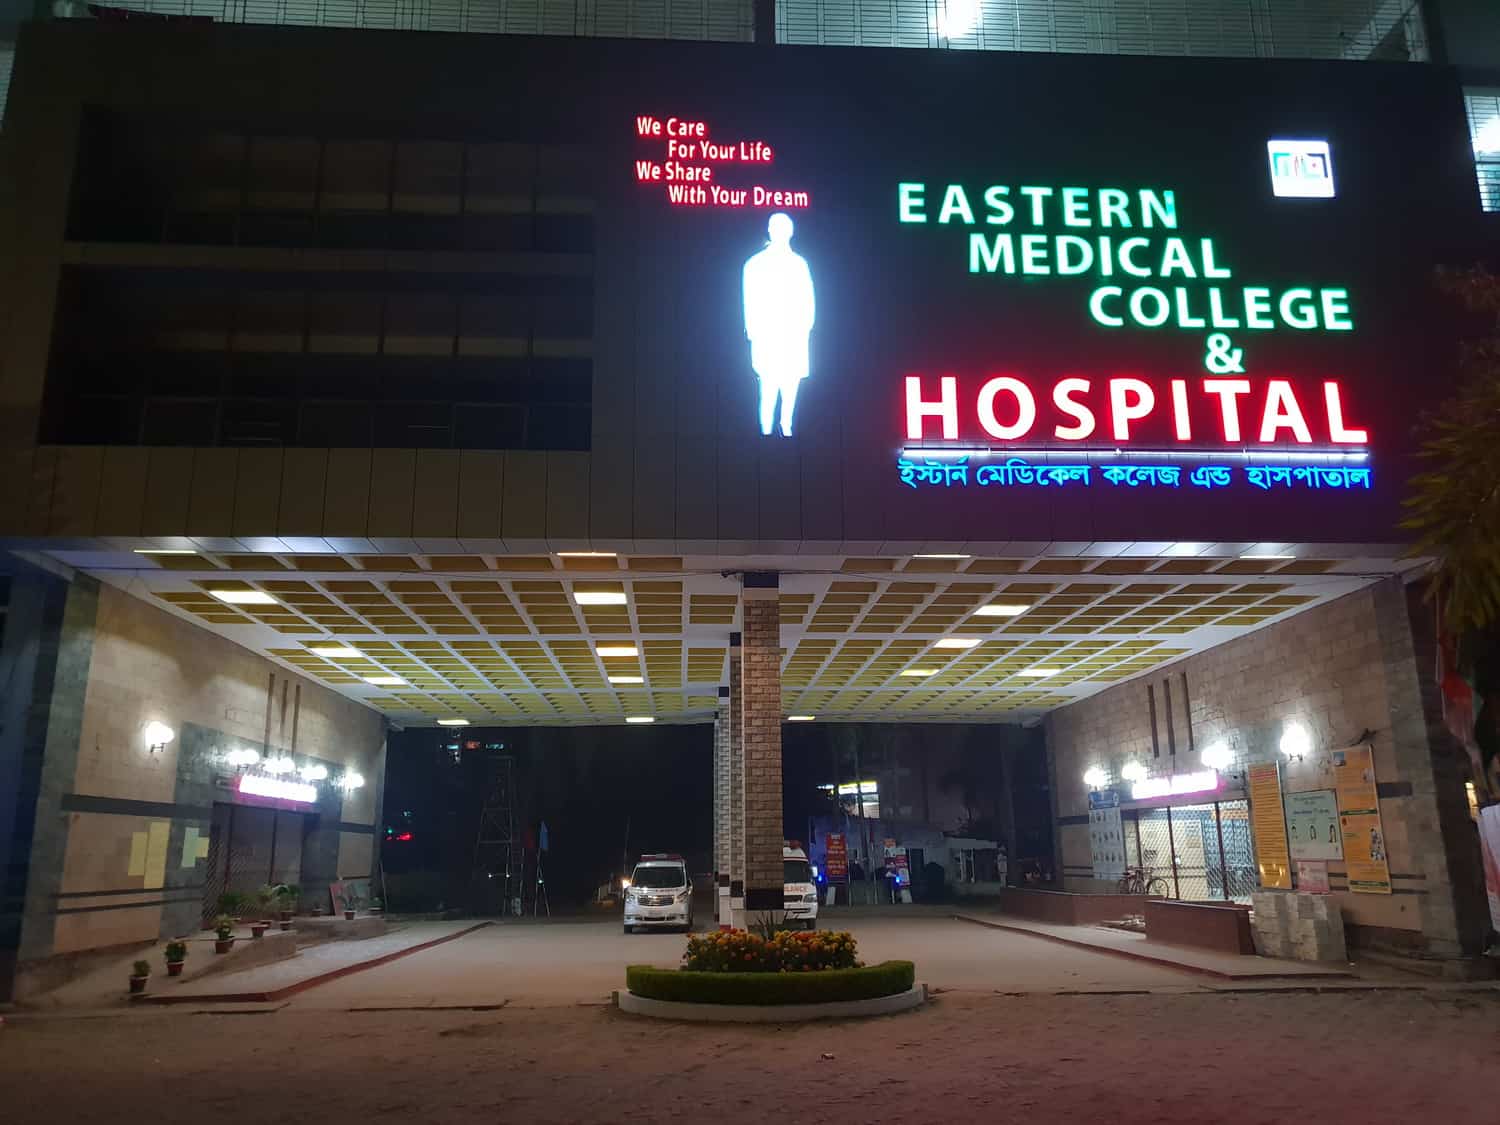 Eastern Medical College & Hospital at Night